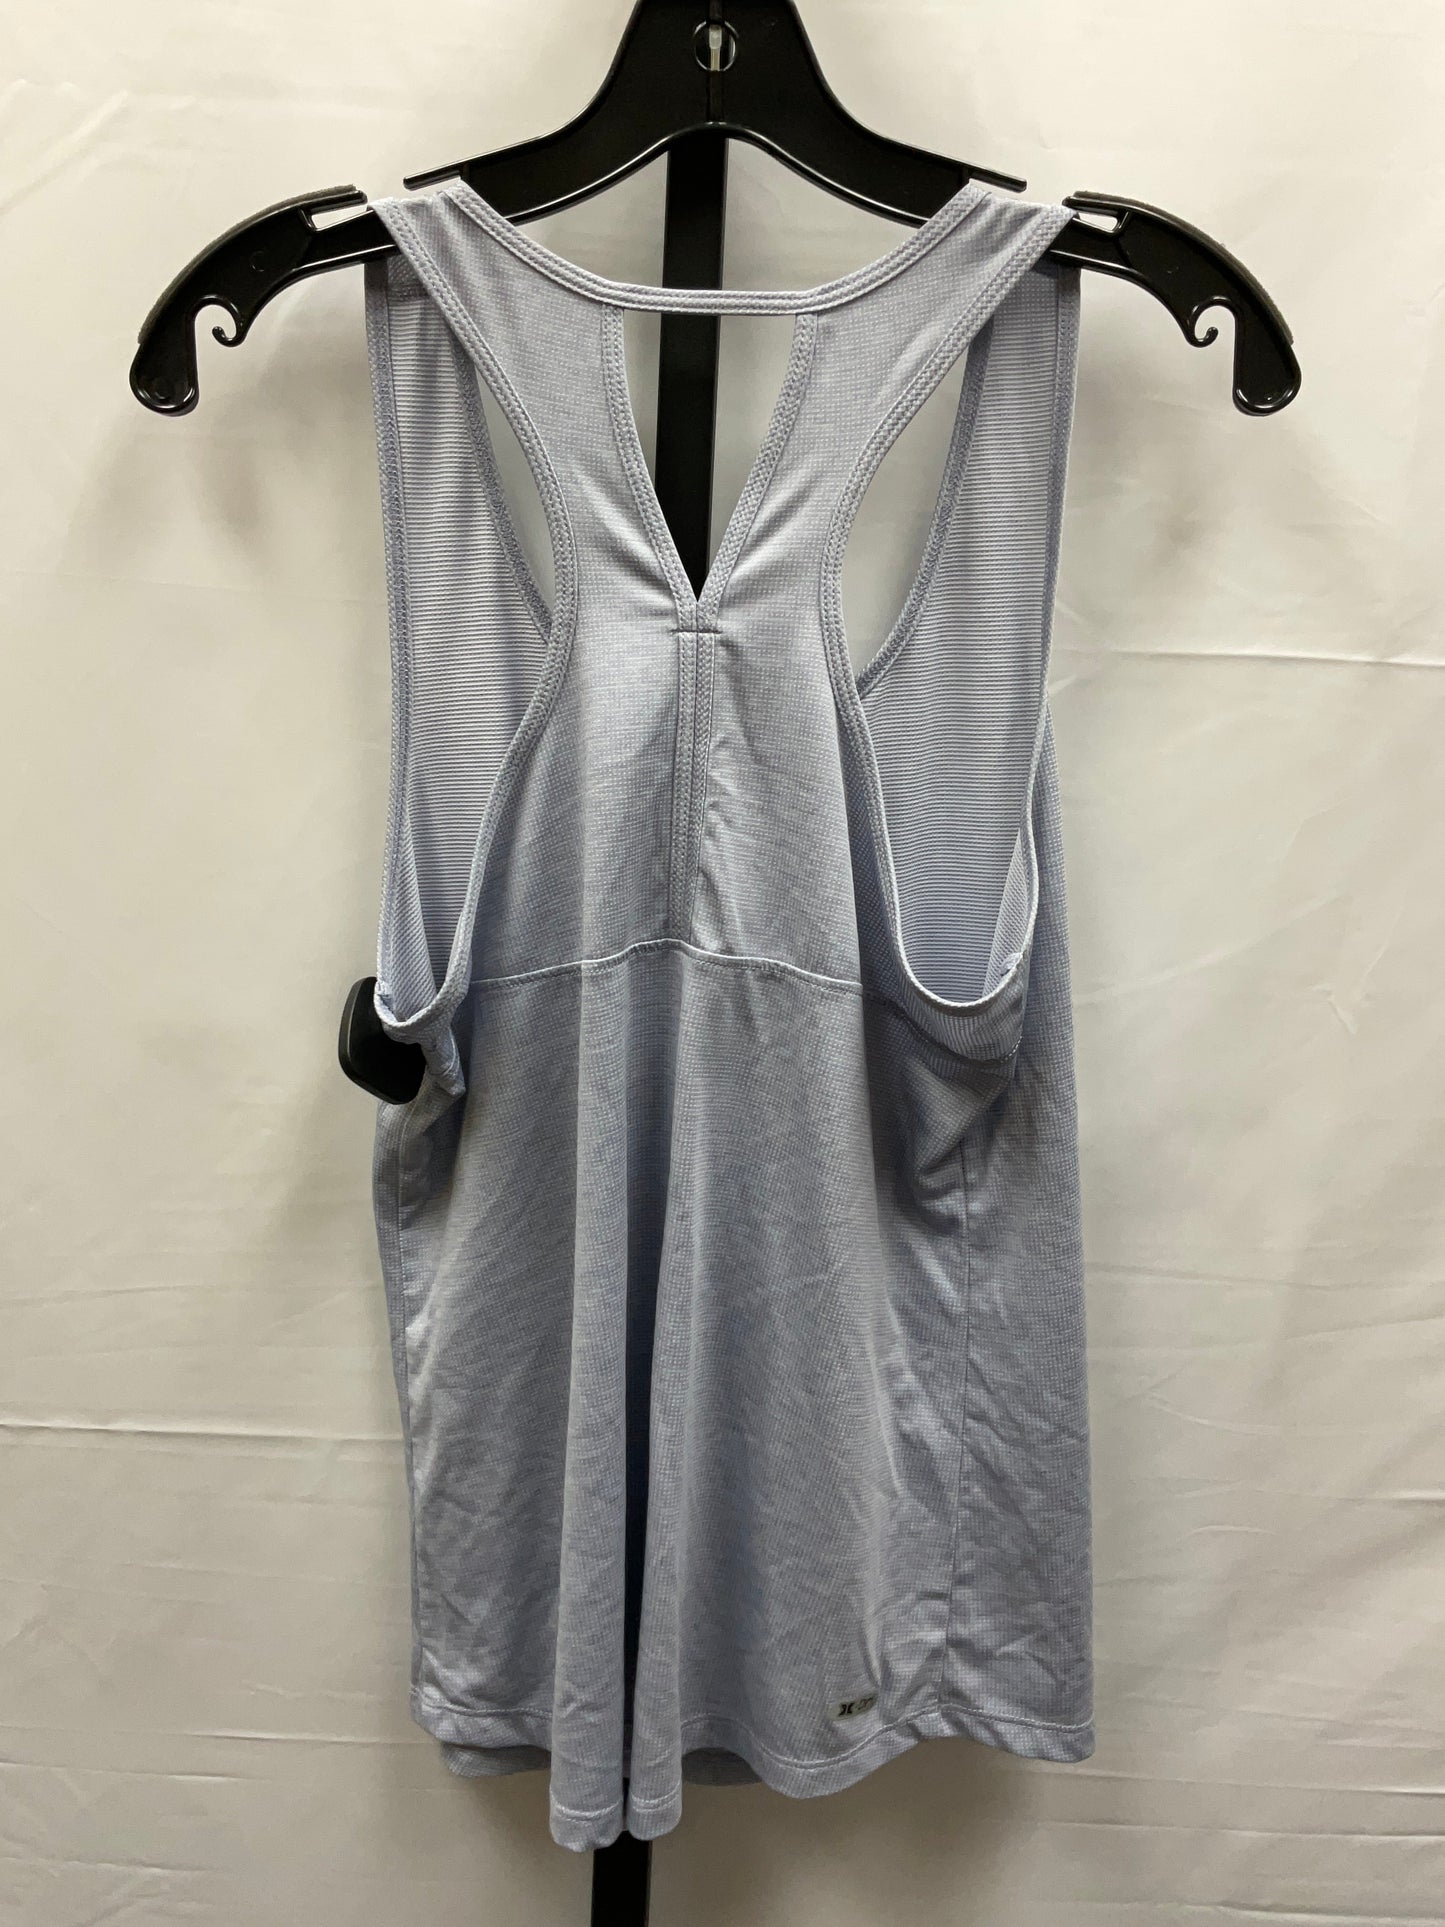 Grey Athletic Tank Top Rbx, Size S